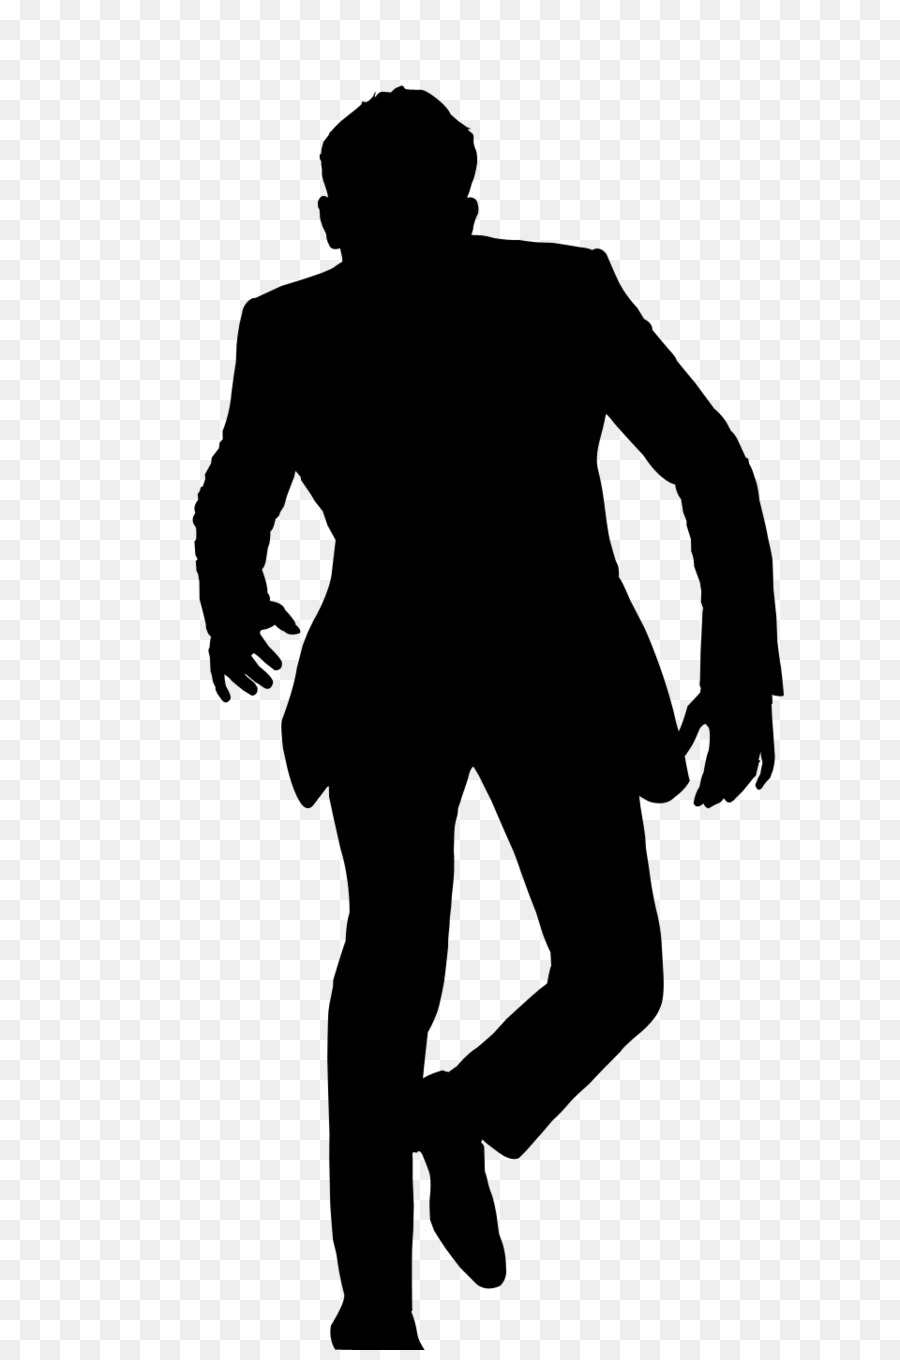 Silhouette Human Vector graphics Clip art Image -  png download - 960*1440 - Free Transparent Silhouette png Download.